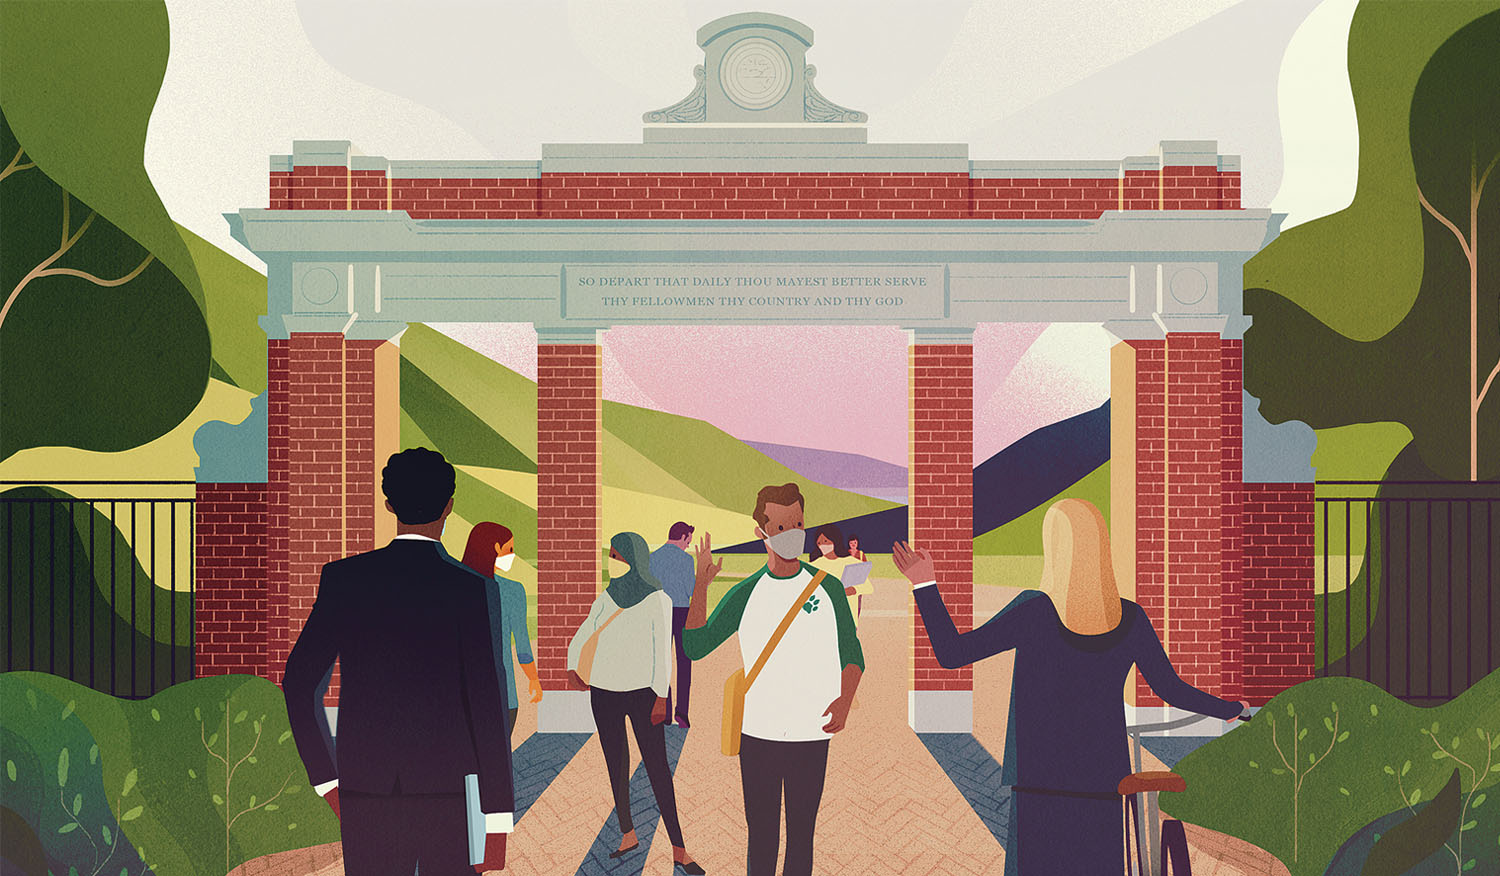 An illustration of the Ohio University College Gateway which reads, 'So depart that daily thou mayest better serve thy fellowman thy country and thy God.' Several illustrated alumni interact by speaking or waving to each other near the College Gateway.